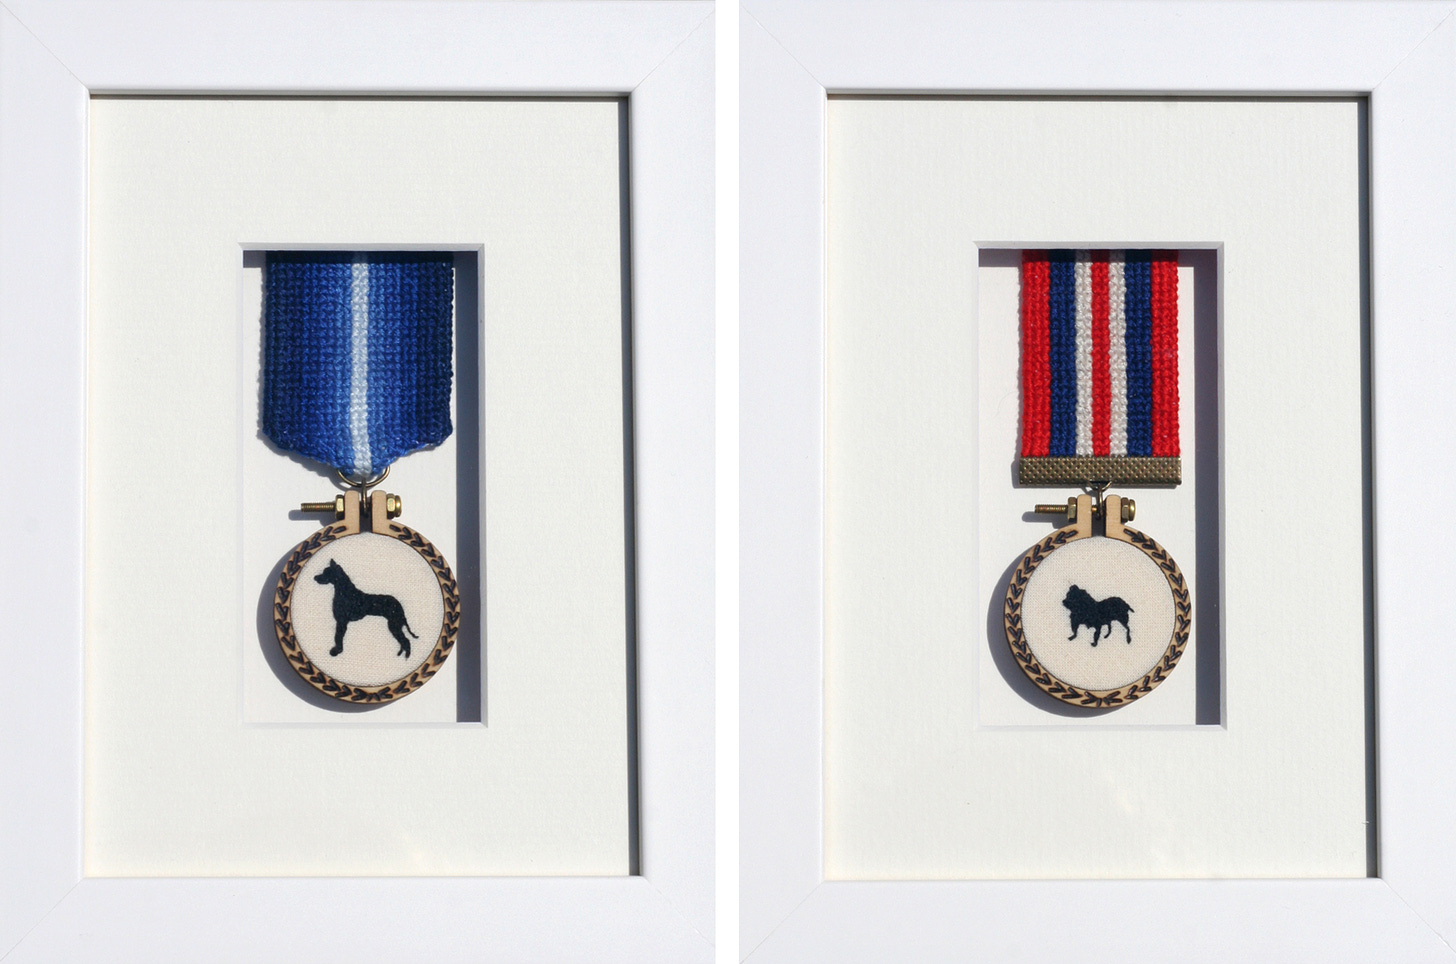 image is of an two framed embroideries side by side in white box frame. Both pieces are embroidered medals, the one on the left has a cross stitched ribbon which has a blue ombré effect going from dark blue either side to light in the middle. Hanging from this is a wooden mini hoop with a black silhouette of a Great Dane stitched on cream cotton. The wooden hoop frame has pyrography detail showing a laurel reef pattern. The medal on the right is similar but has a red white and blue striped cross stitch ribbon and the silhouette of the dog is that of a British bulldog.